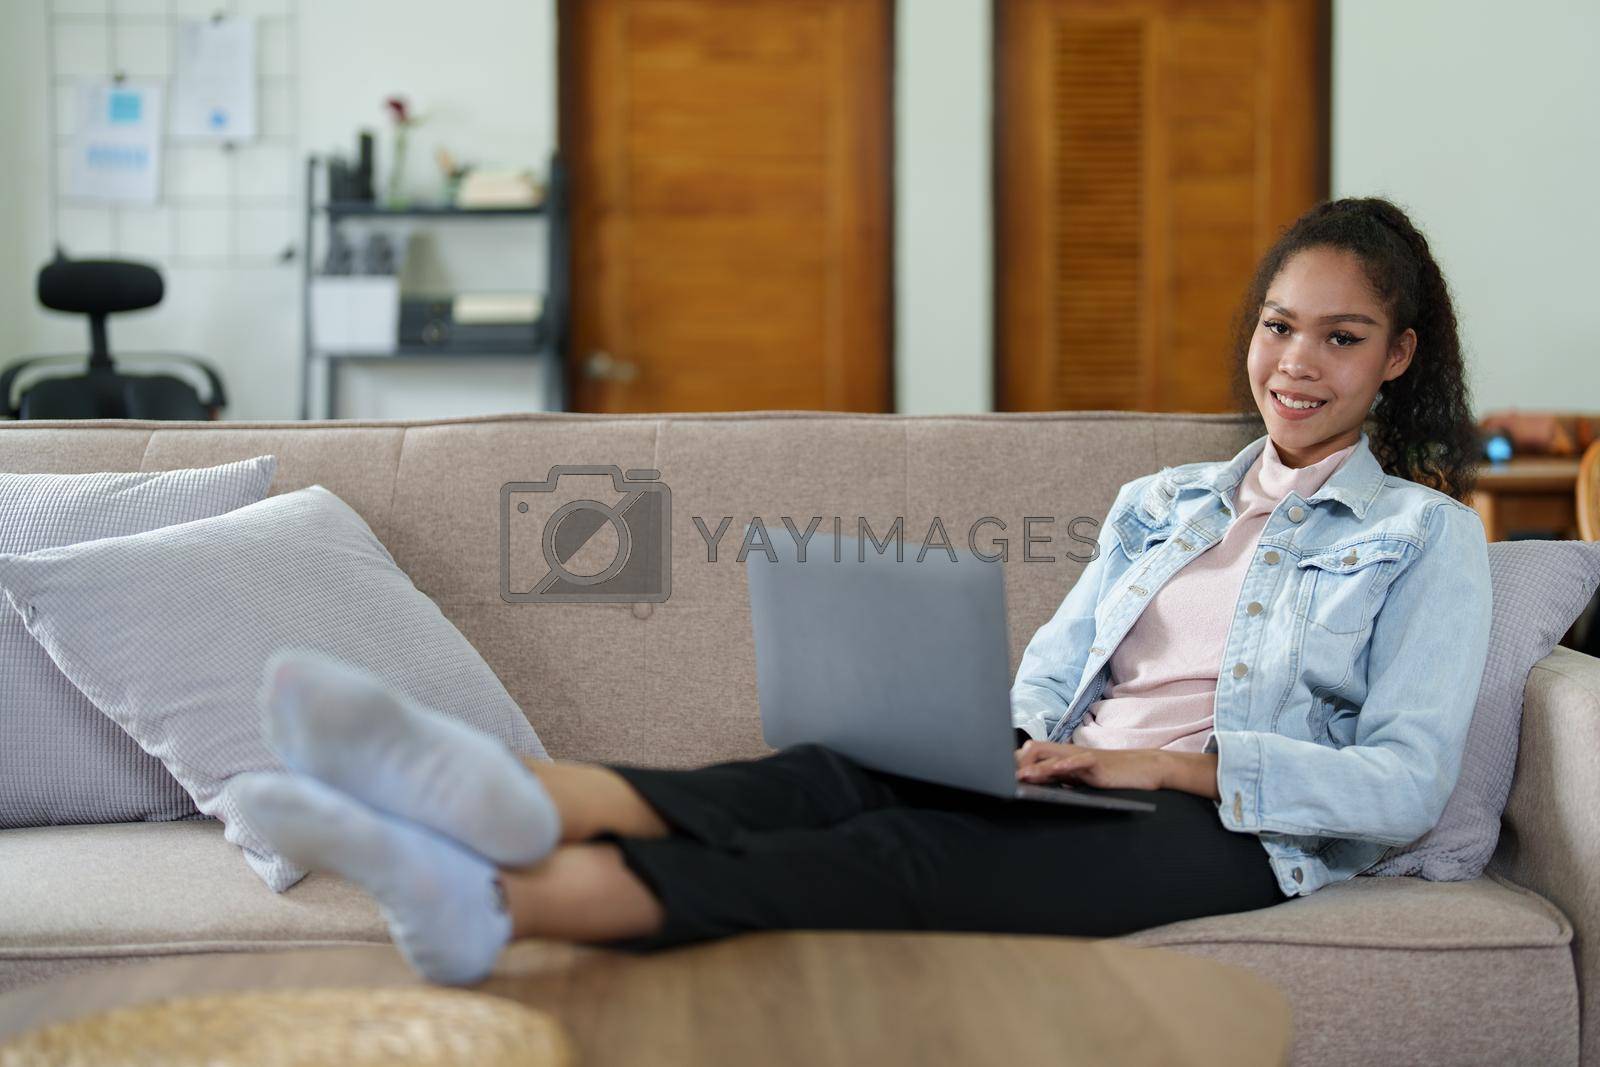 Royalty free image of Portrait of a black person using a computer at home by Manastrong